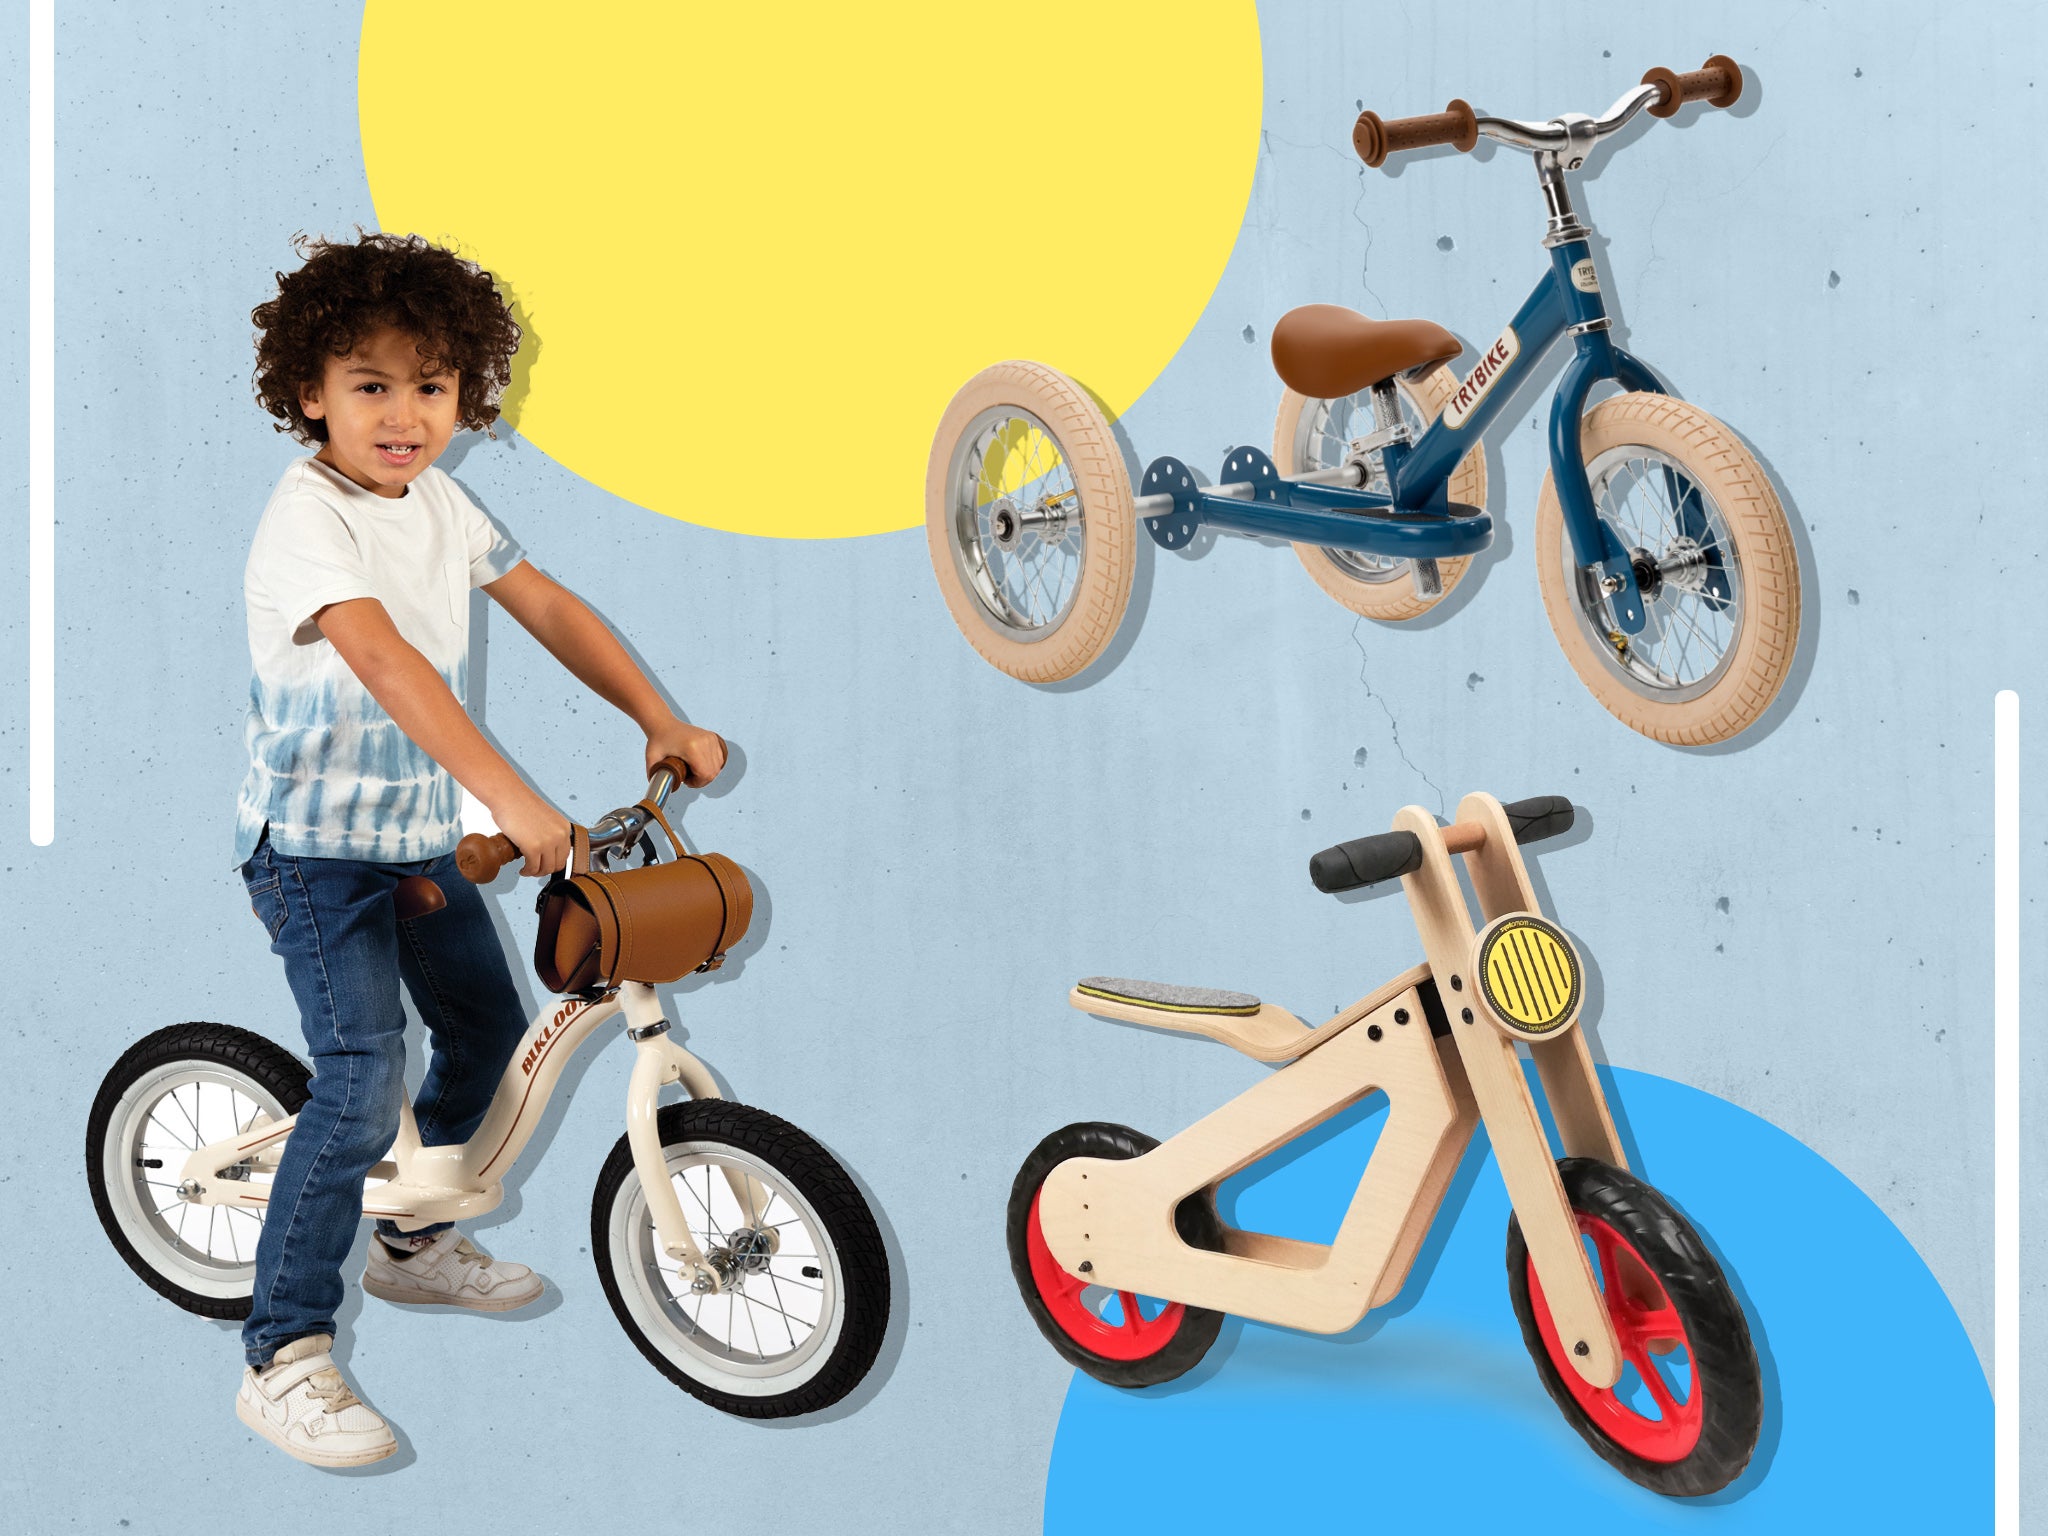 Balance Bike for 2 3 4 5 Year Old Boys Girls 12 inch No Pedal Rubber Air Tires Adjustable Lightweight No Training Wheels Toddler Bicycle/Best Present Toddler Toys for Girls Boys HAPTOO Toddler Bike 